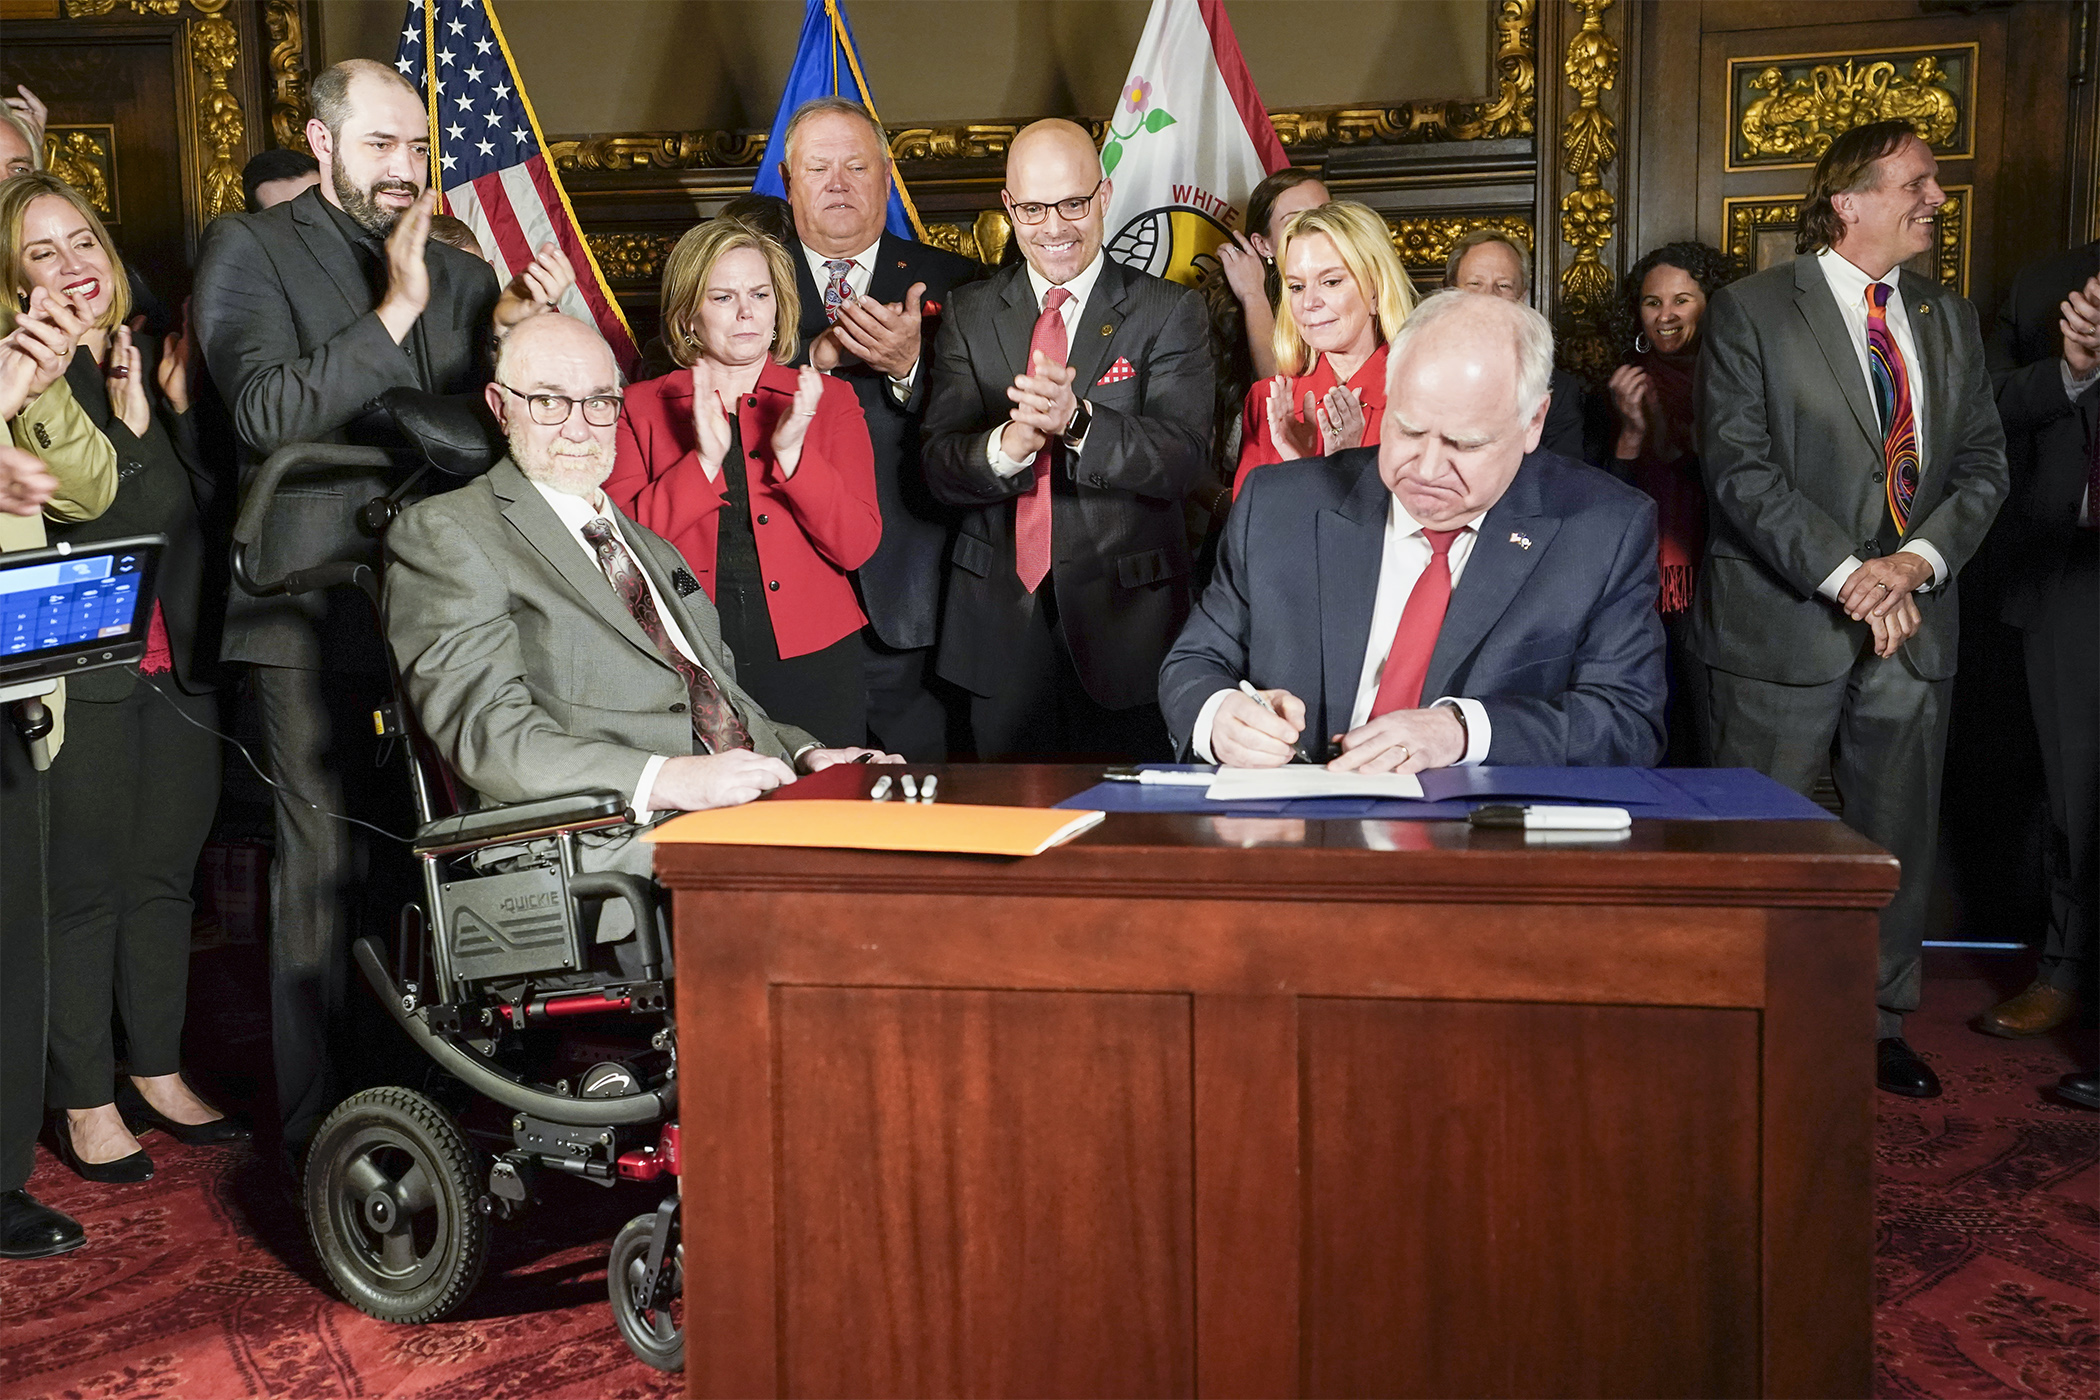 Gov. Tim Walz signs into law a bill to provide $25 million for ALS research and caregiver support March 30. Also pictured are Sen. David Tomassoni, Rep. Anne Neu Brindley, Sen. Tom Bakk, Rep. Dave Lislegard and Sen. Karin Housley. (Photo by Paul Battaglia)